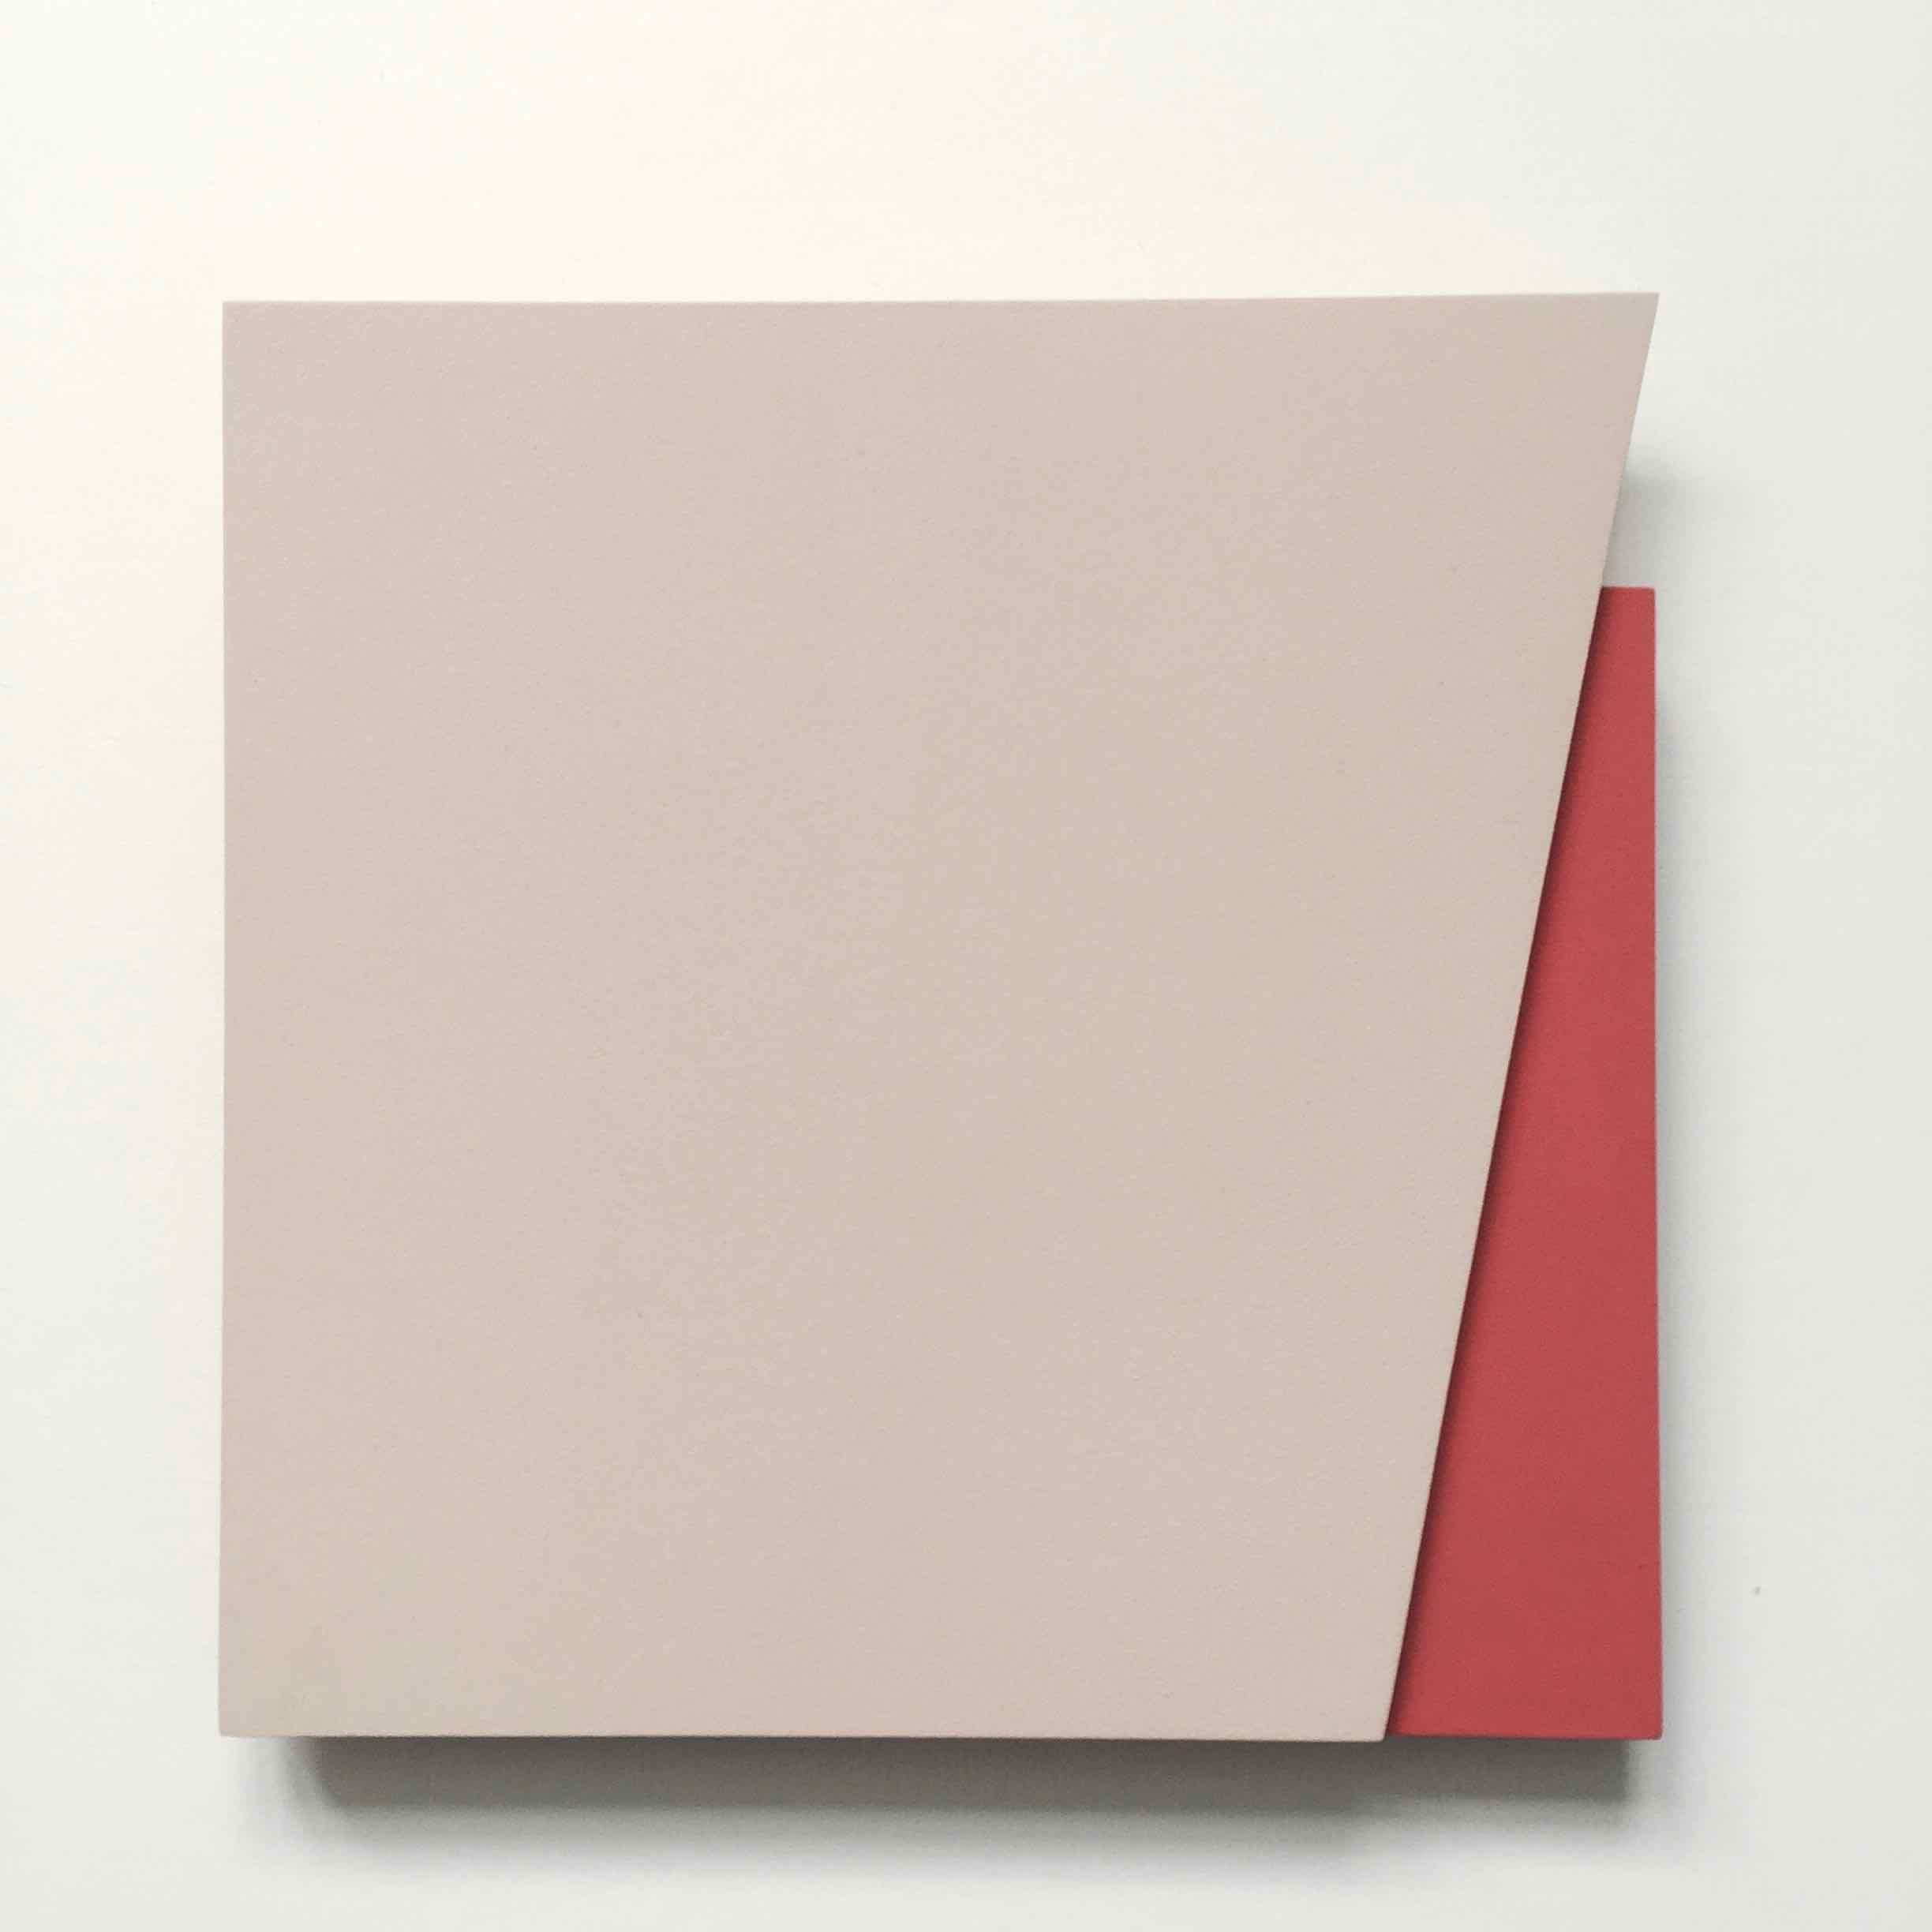 'Cut-out 20': Four Minimal Hard Edge Abstract Paintings by Laura Jane Scott 2